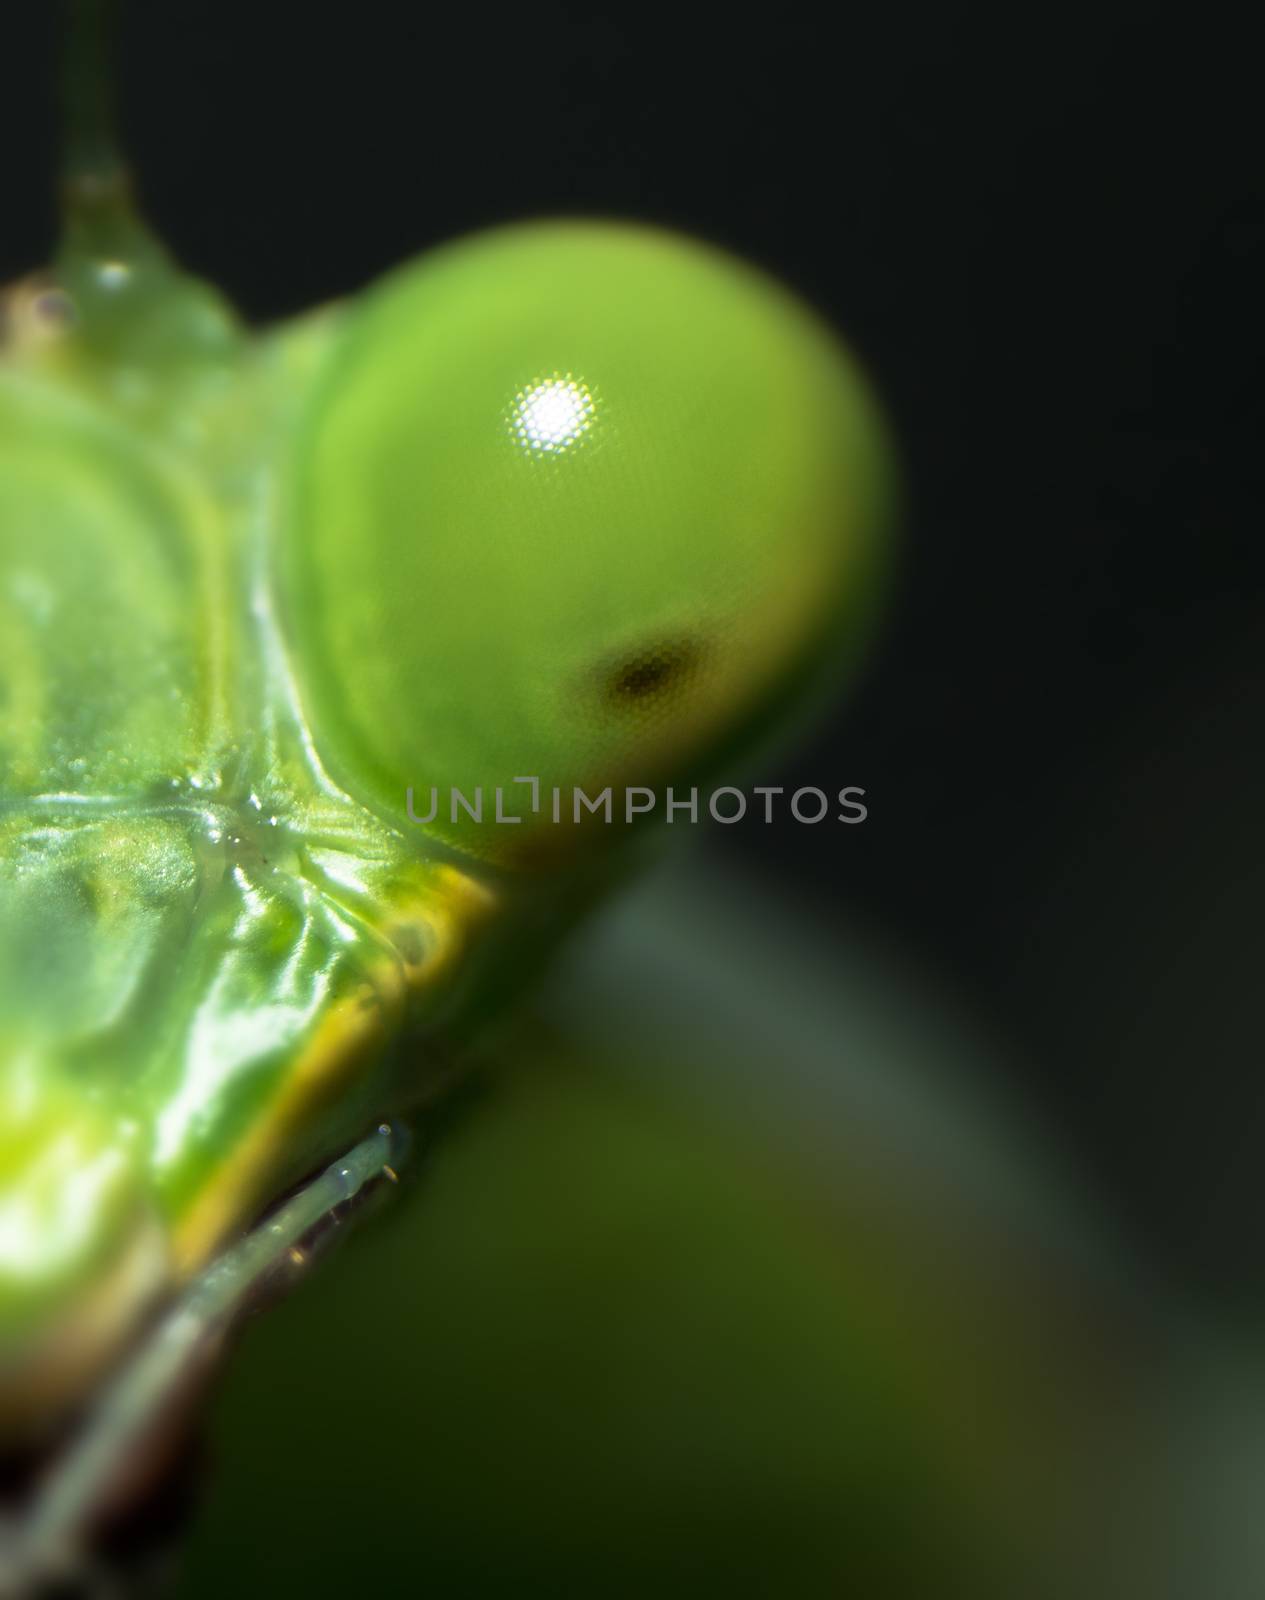 a green praying mantis eye close up close and side of its head